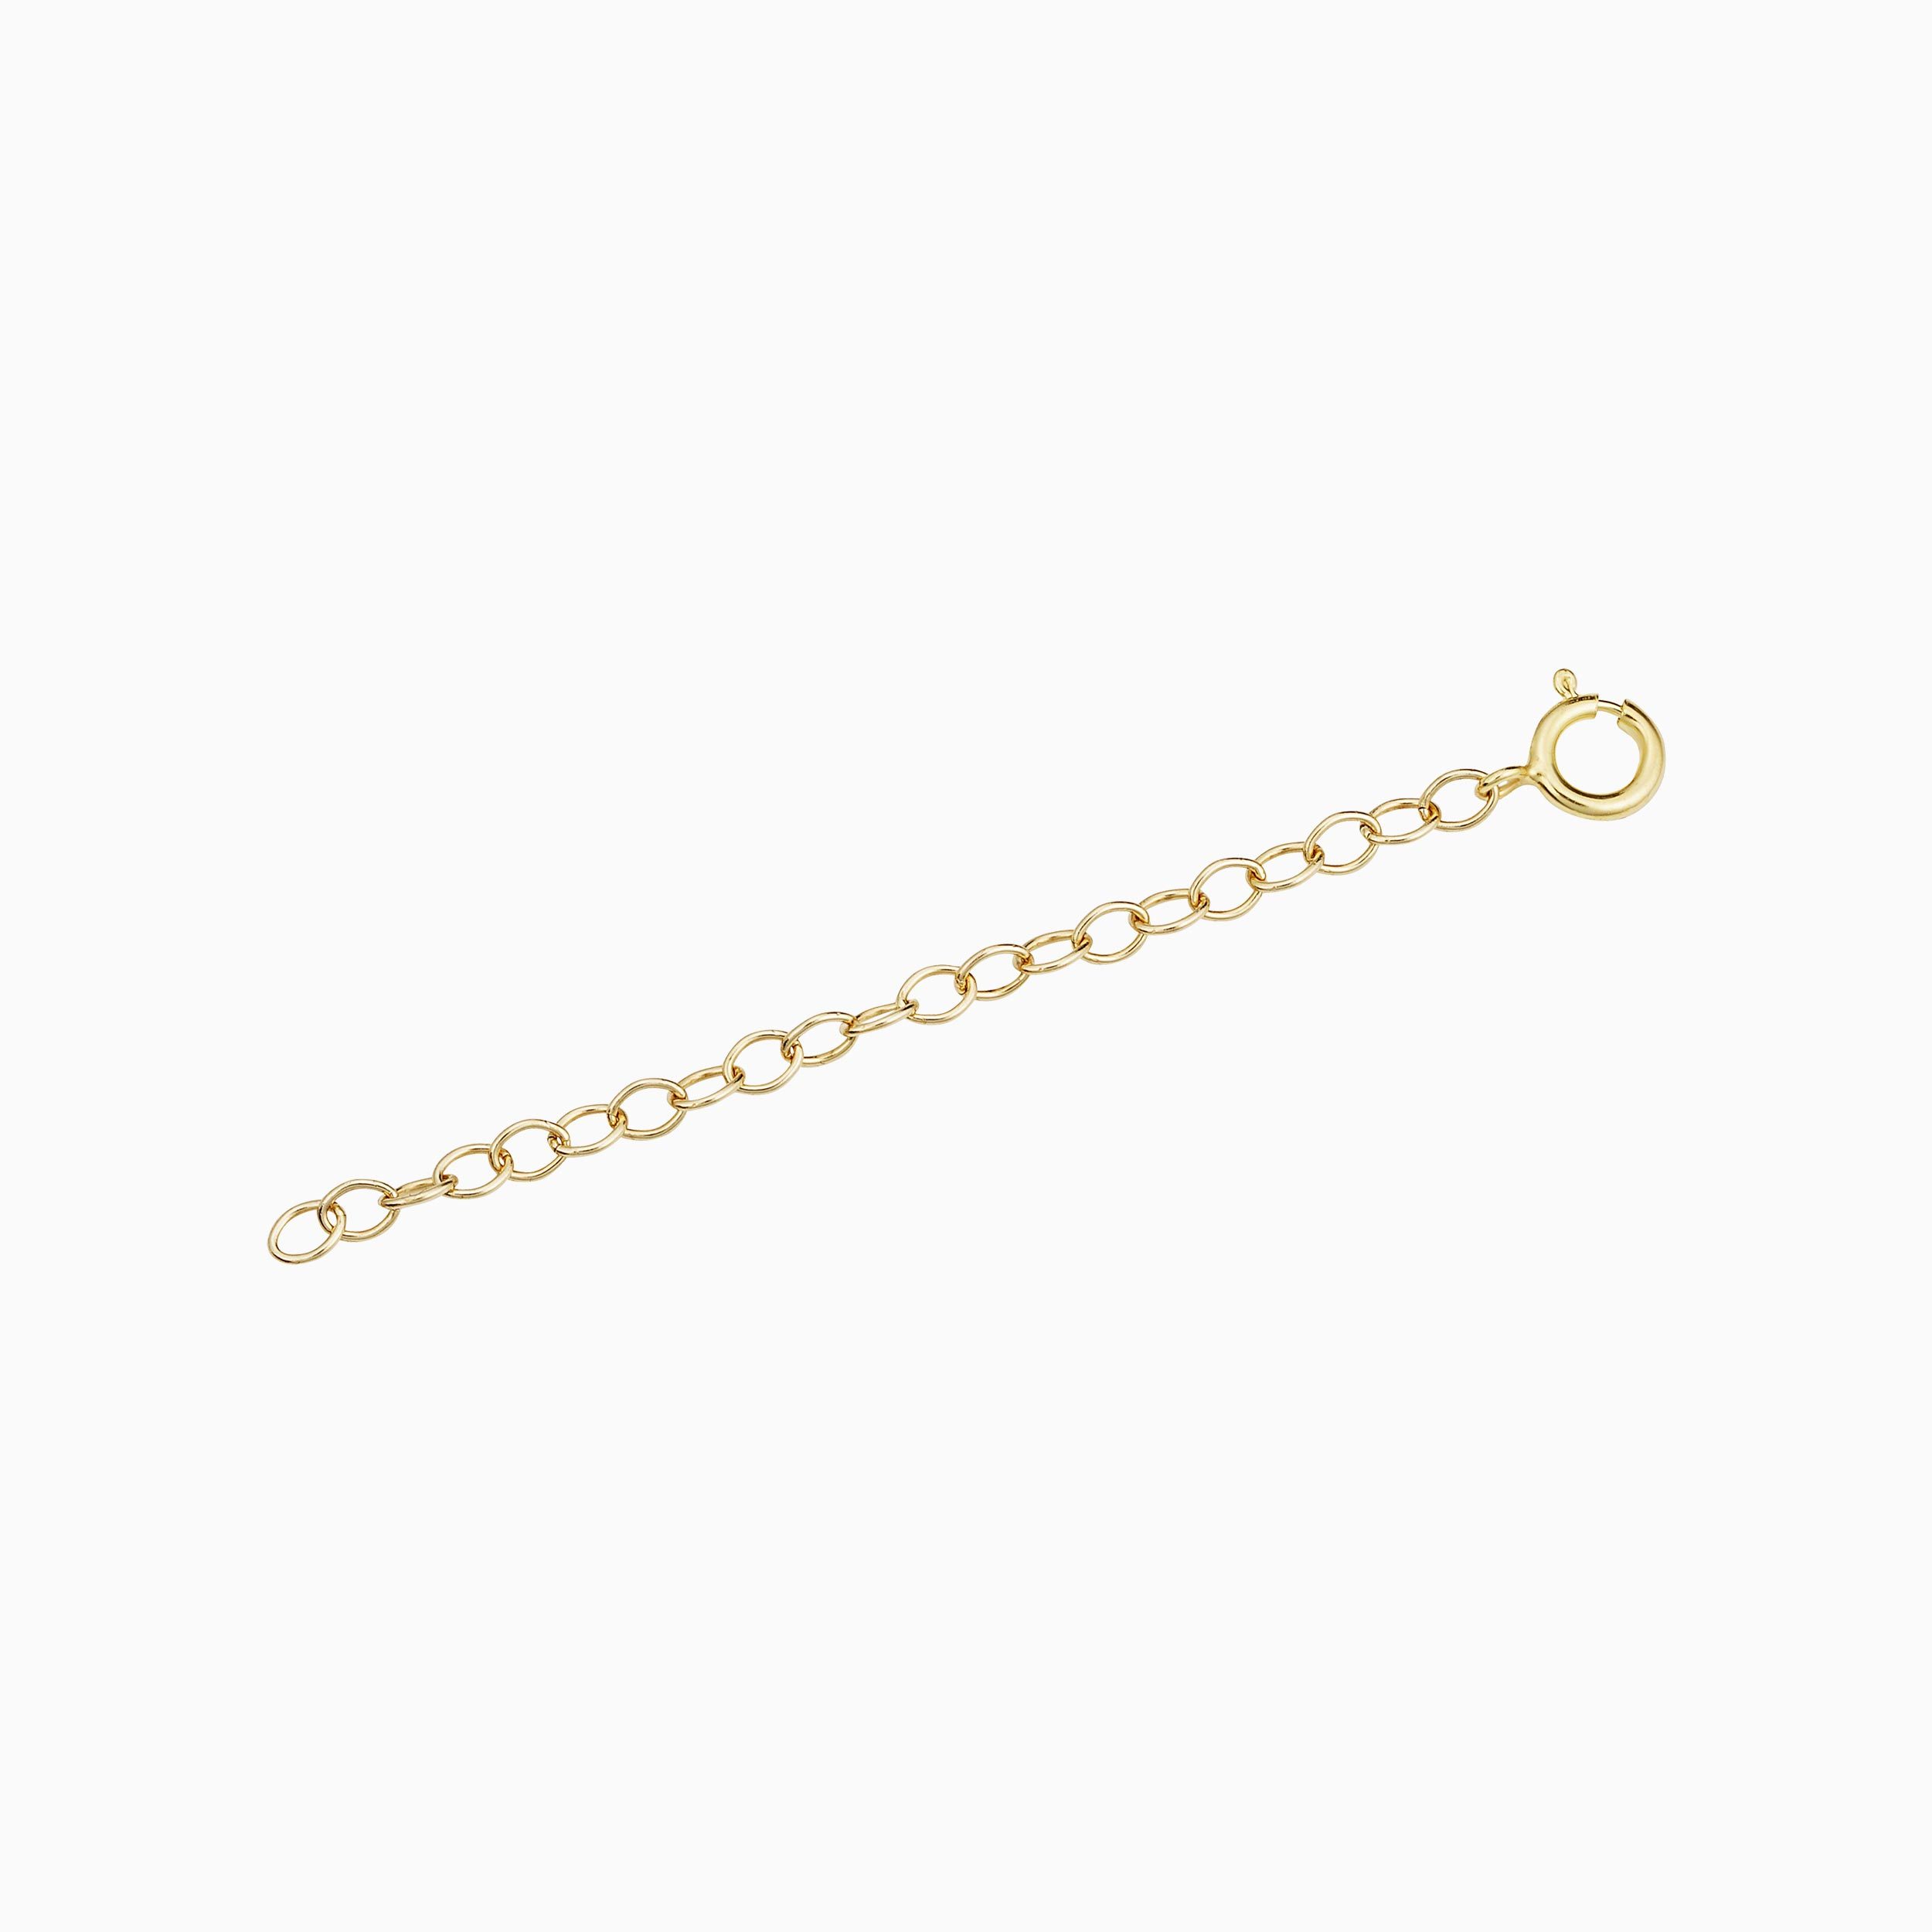 EX204-Chain Extender 2-Inch Satin Hamilton Gold Plated (1-Pc